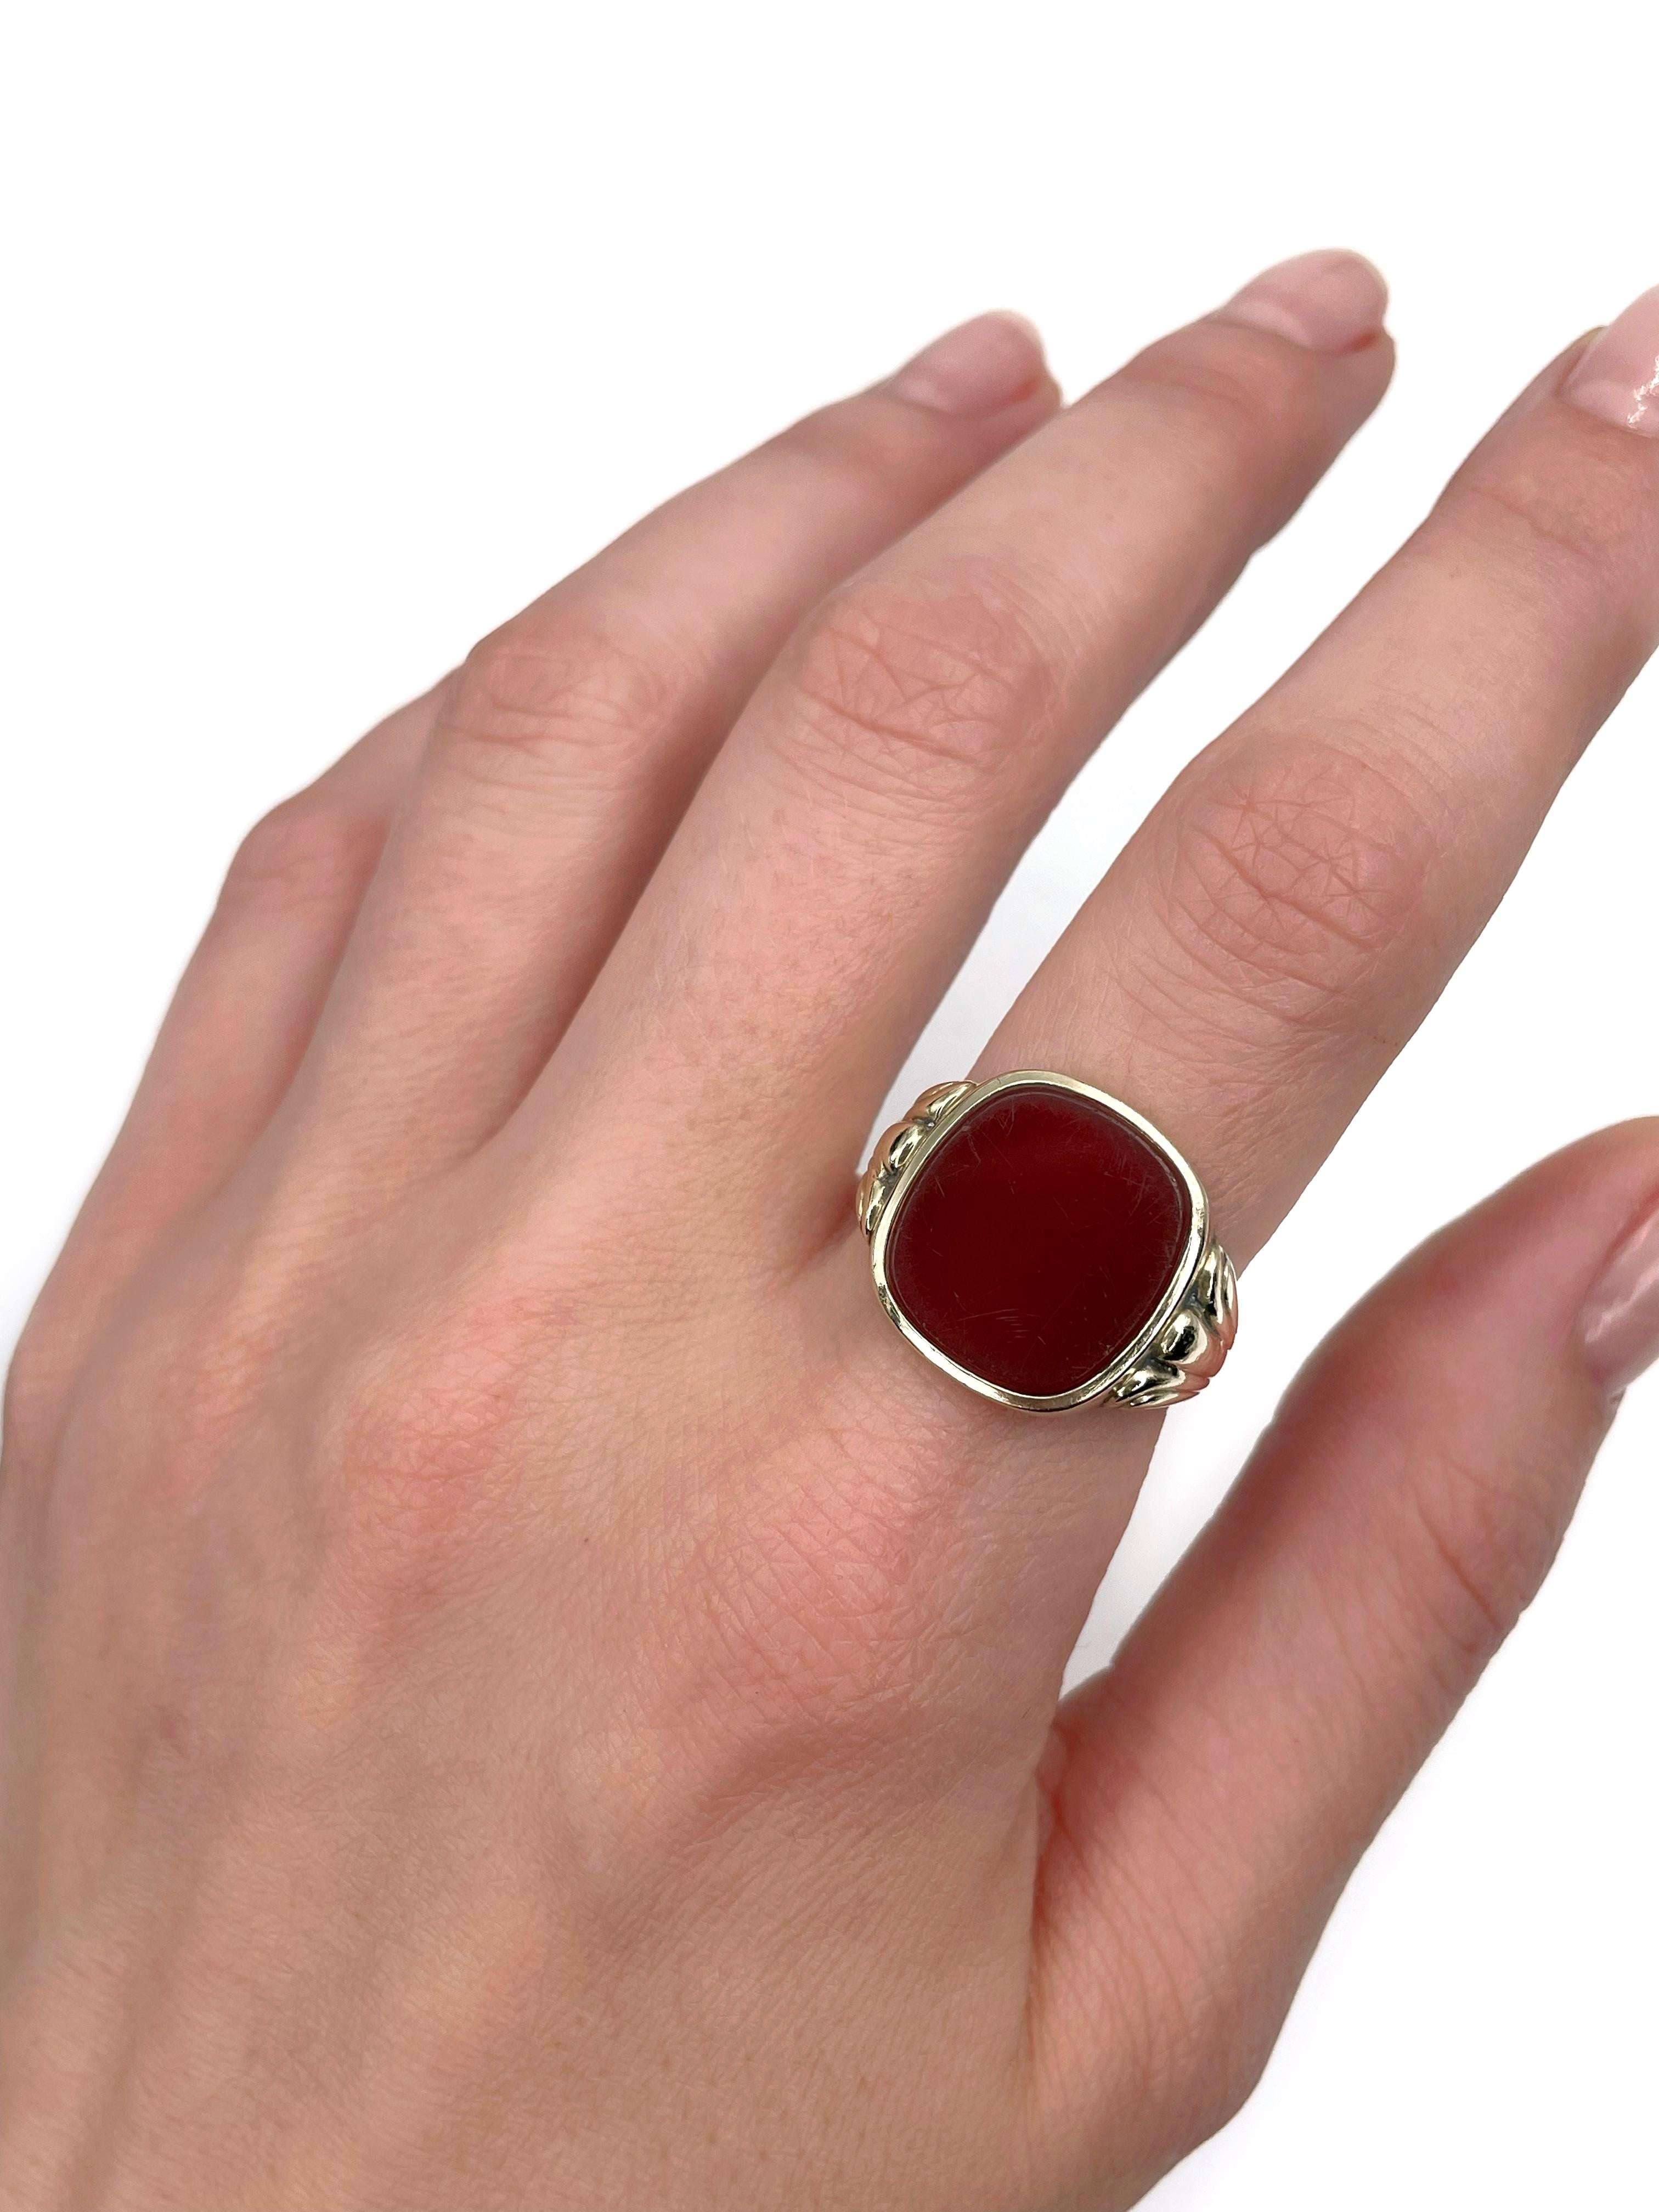 This is a vintage signet ring crafted in 14K slightly yellow gold. The piece features a rectangle carnelian. The surface has minor scratches. 

Weight: 6.69g
Size: 19 (US 9)

IMPORTANT: please ask about the possibility to resize before purchase.